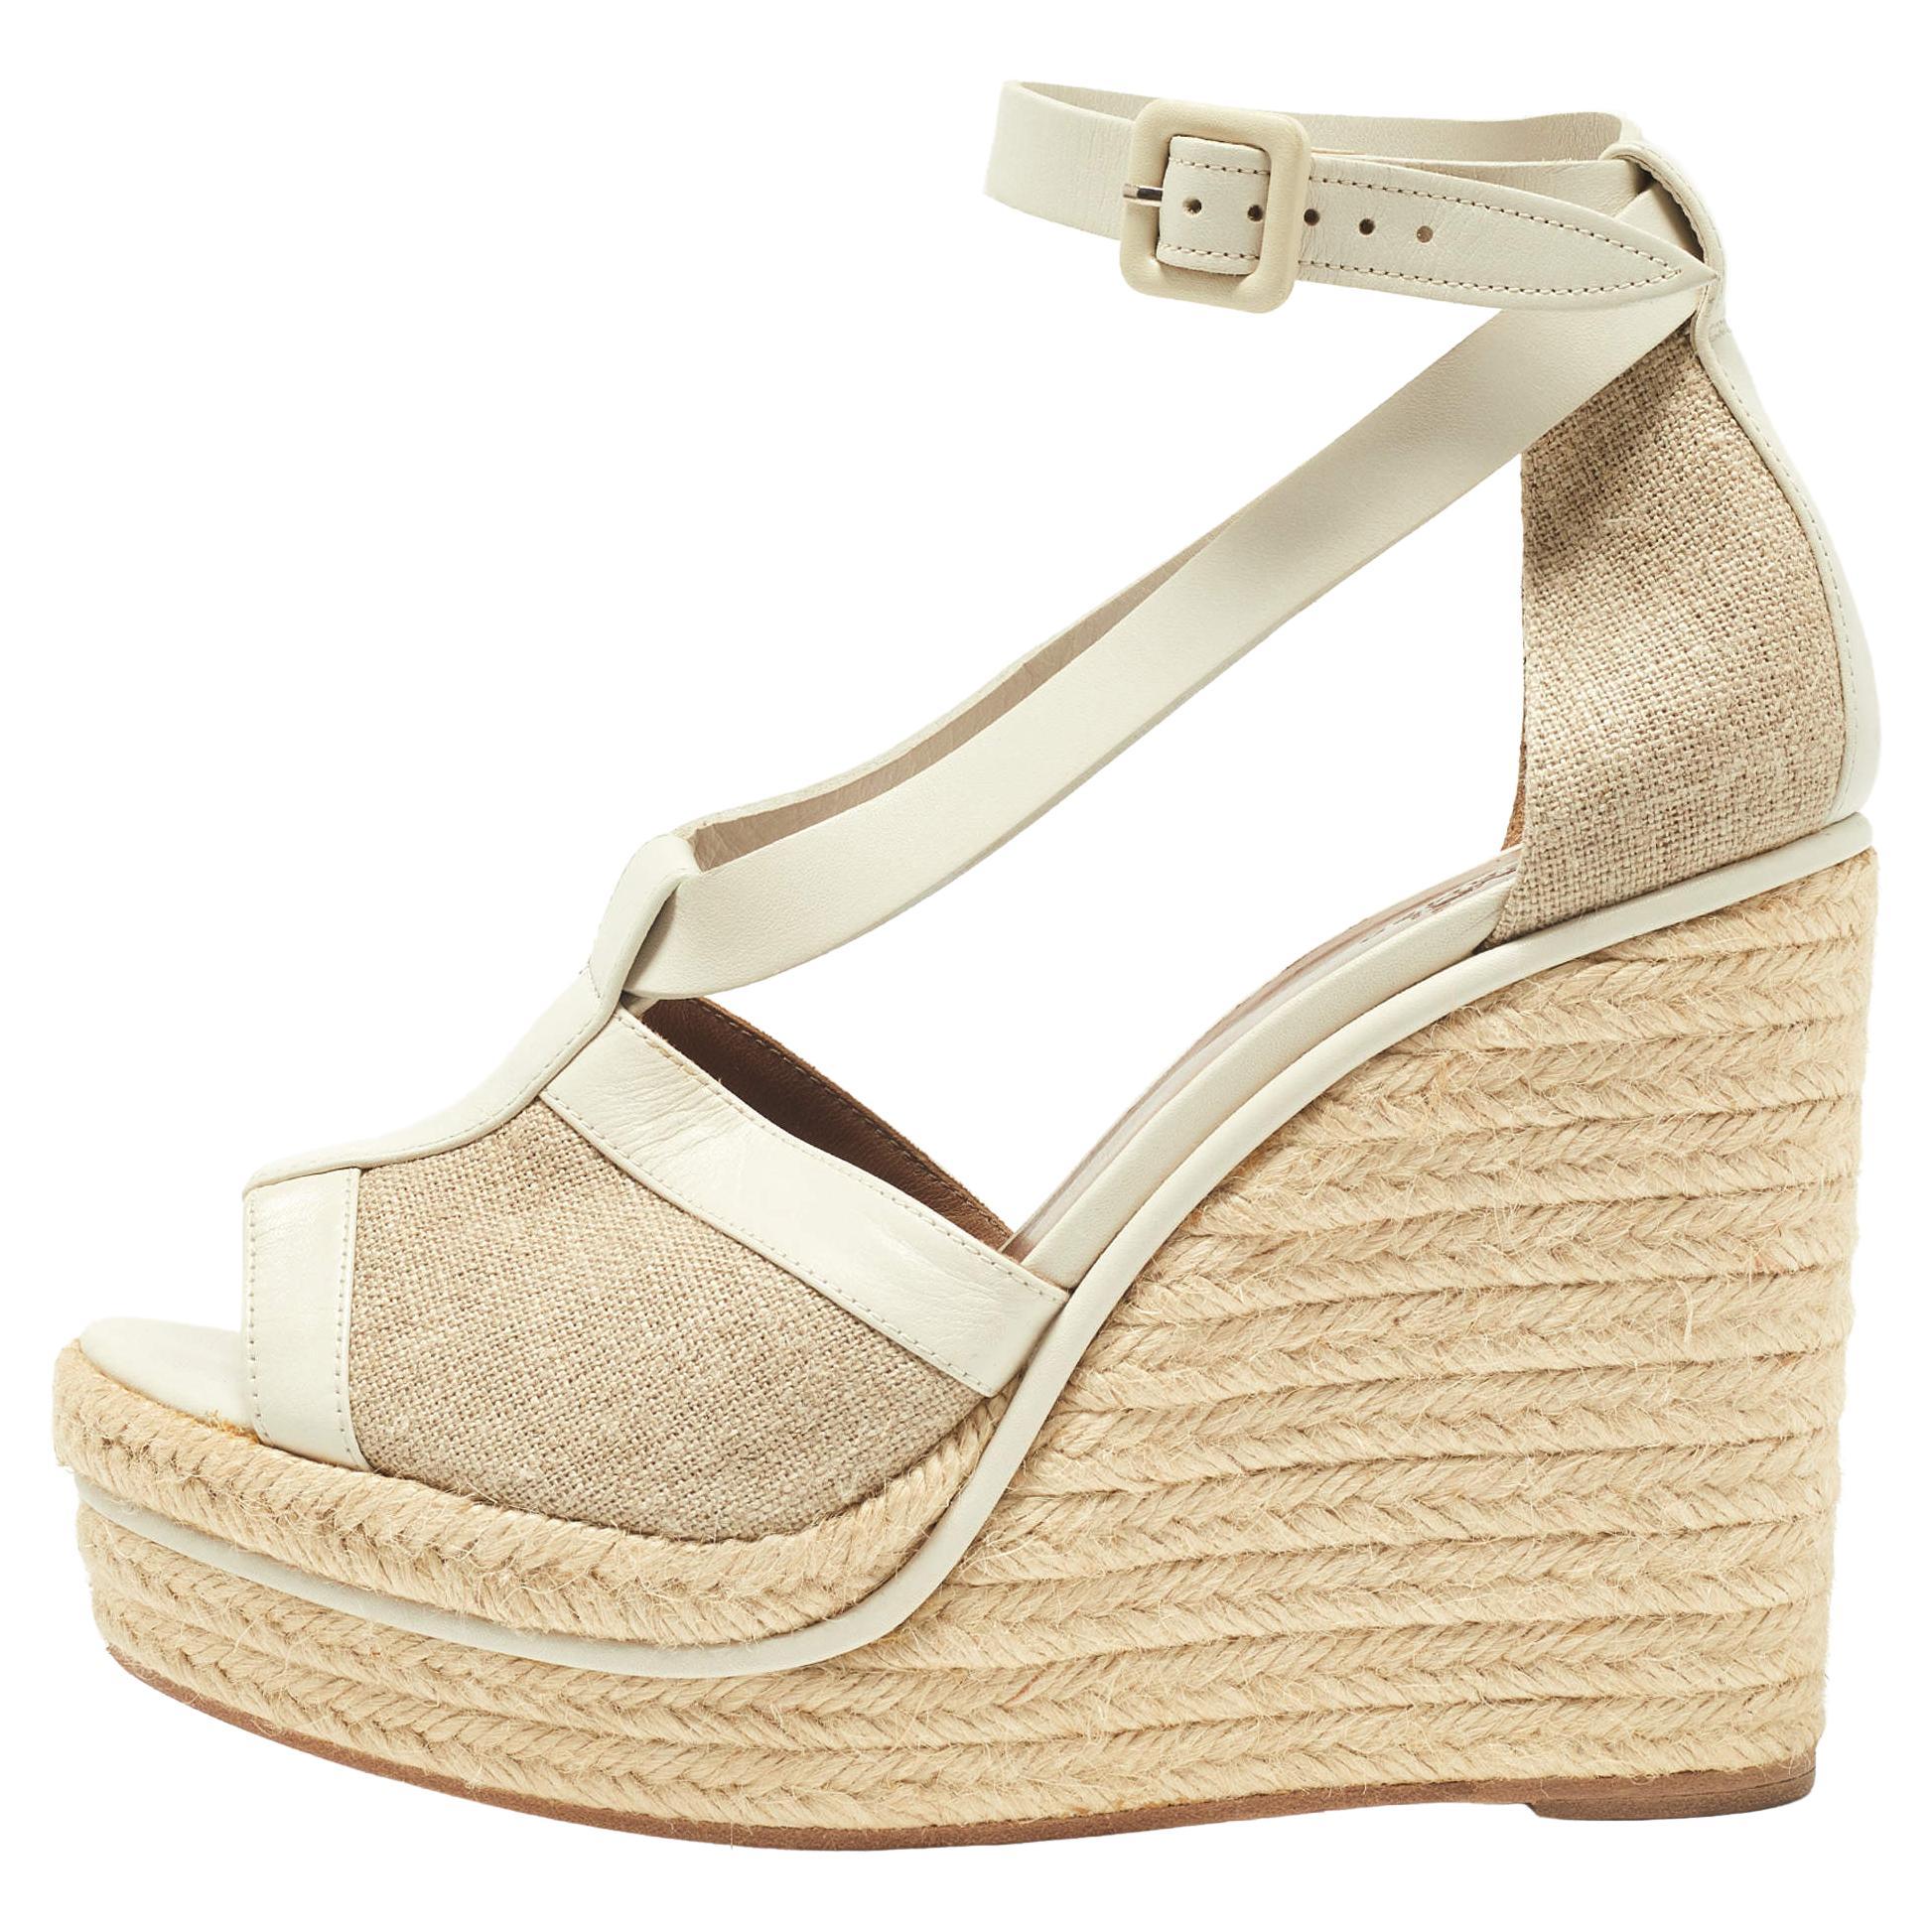 Hermes White/Beige Leather and Canvas Ibiza Espadrille Wedge Sandals Size 39